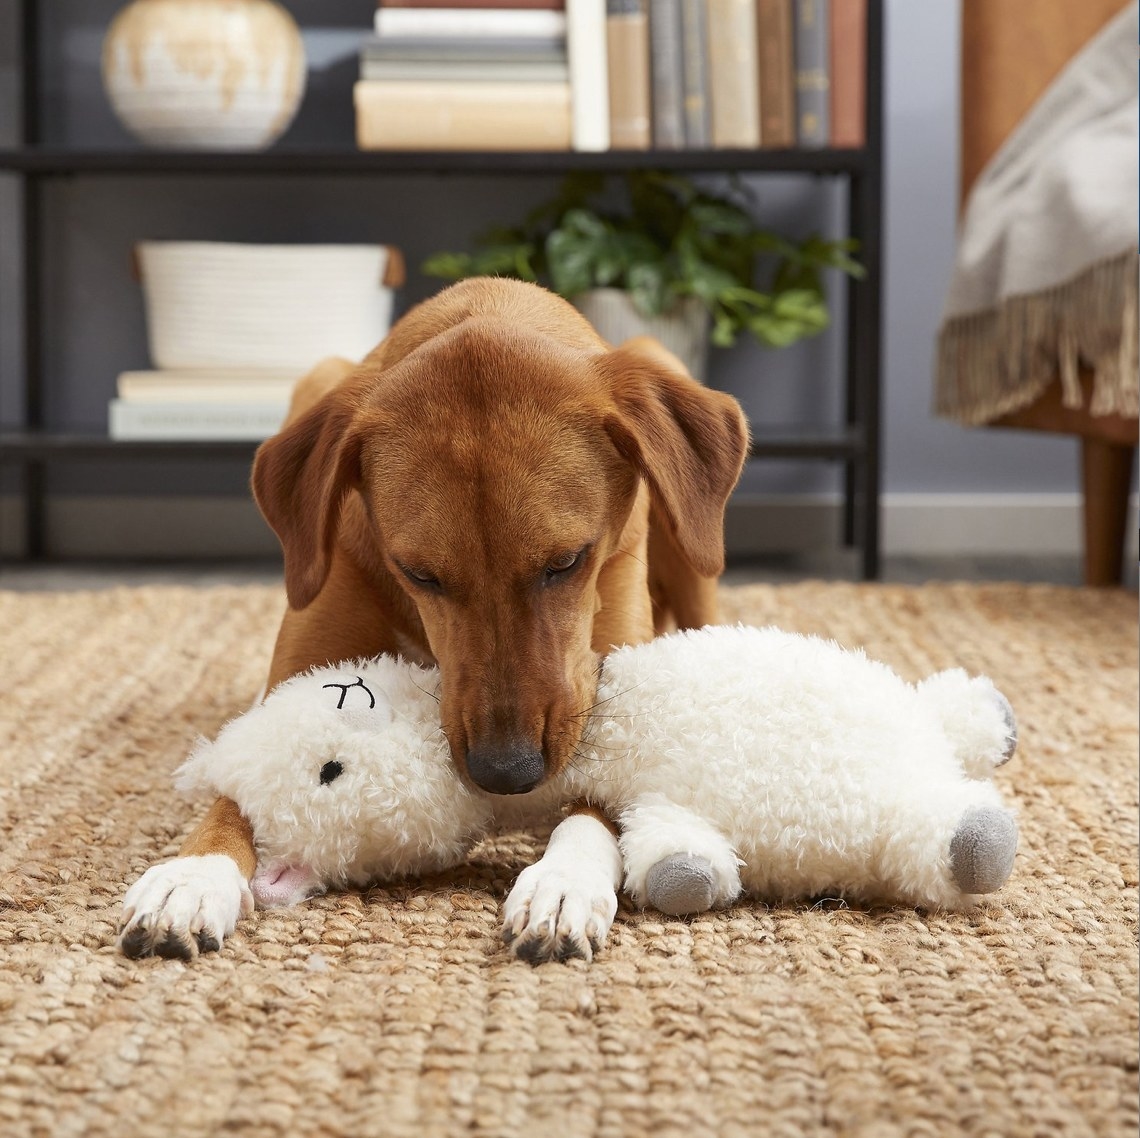 A brown dog chewing on a white llama toy